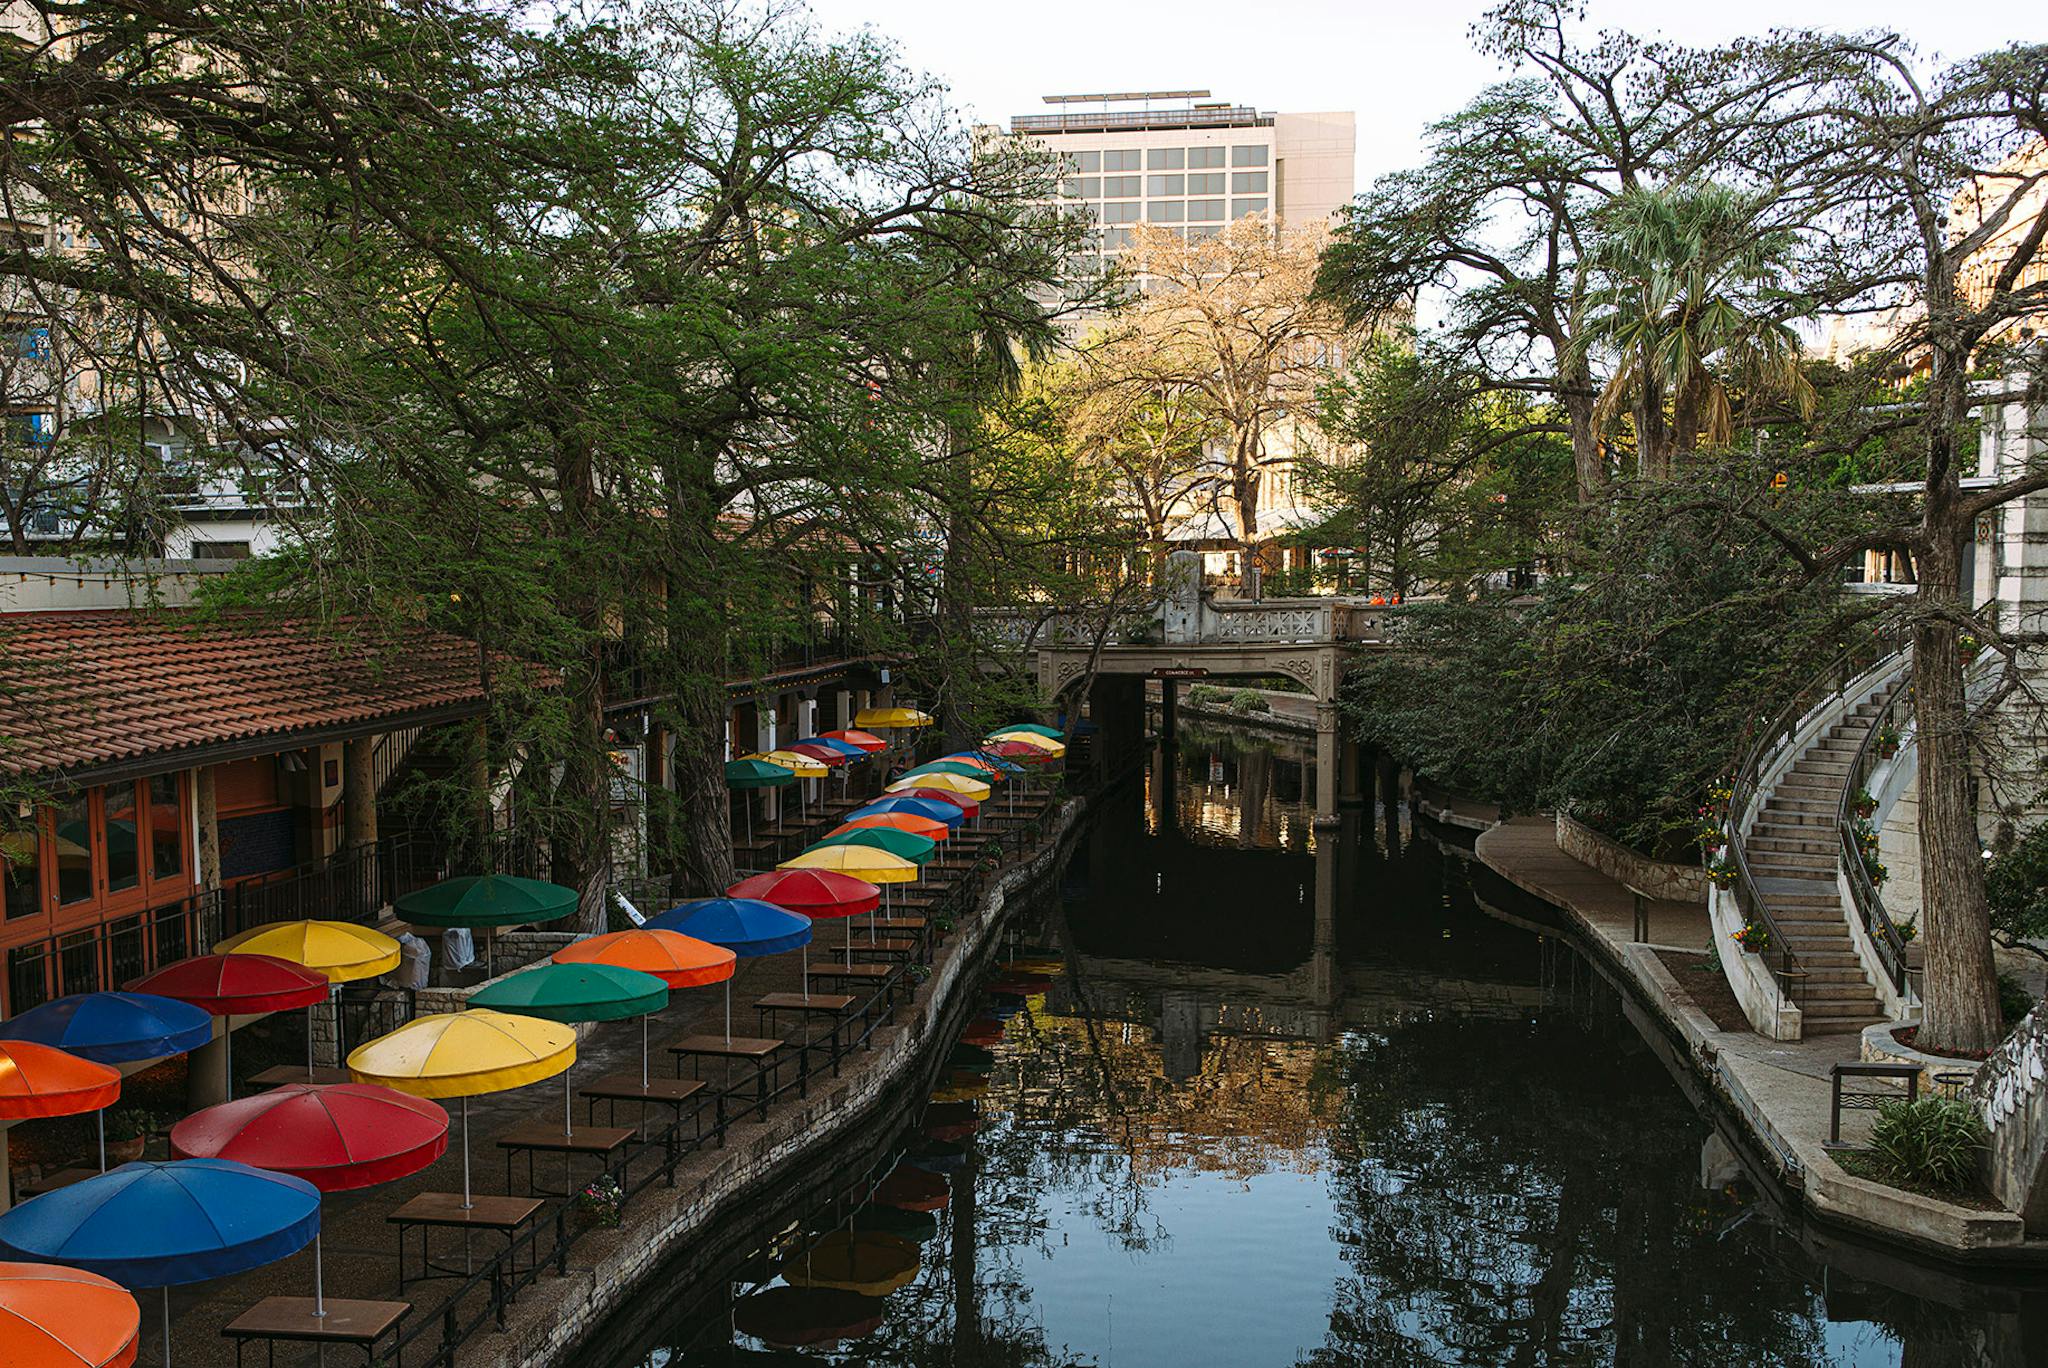 The San Antonio River Walk sits mostly empty, and its waters have begun running unusually clear.